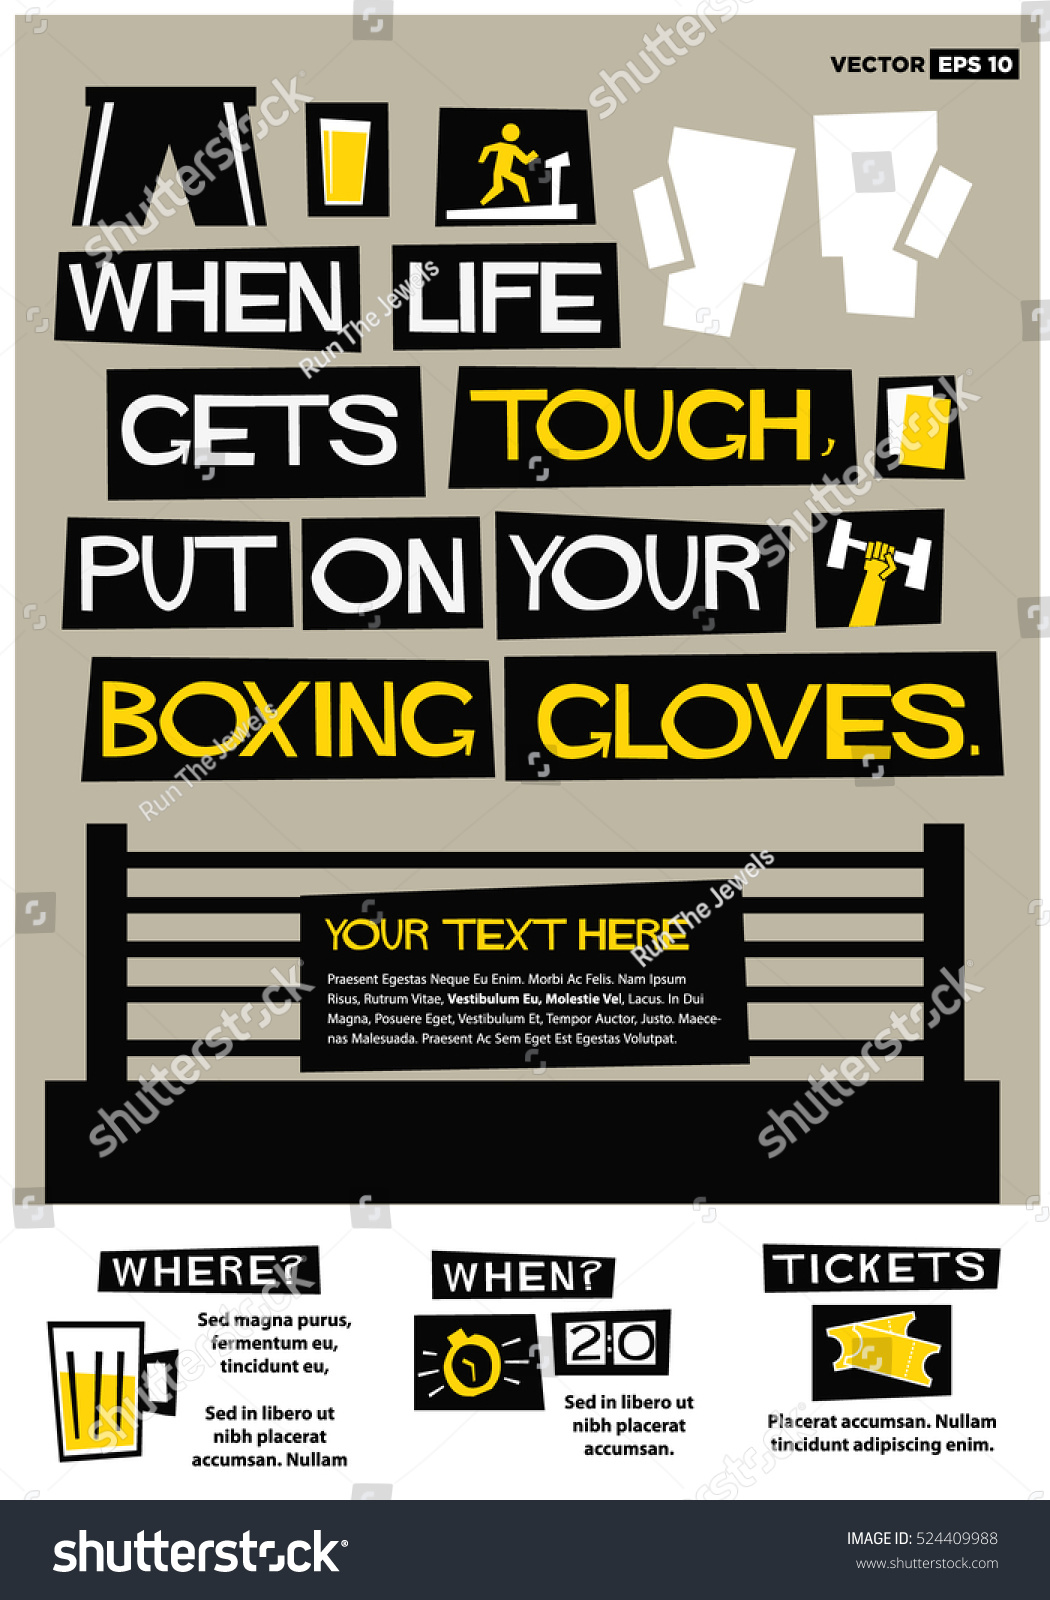 When life s tough put on your boxing gloves Flat Style Vector Illustration